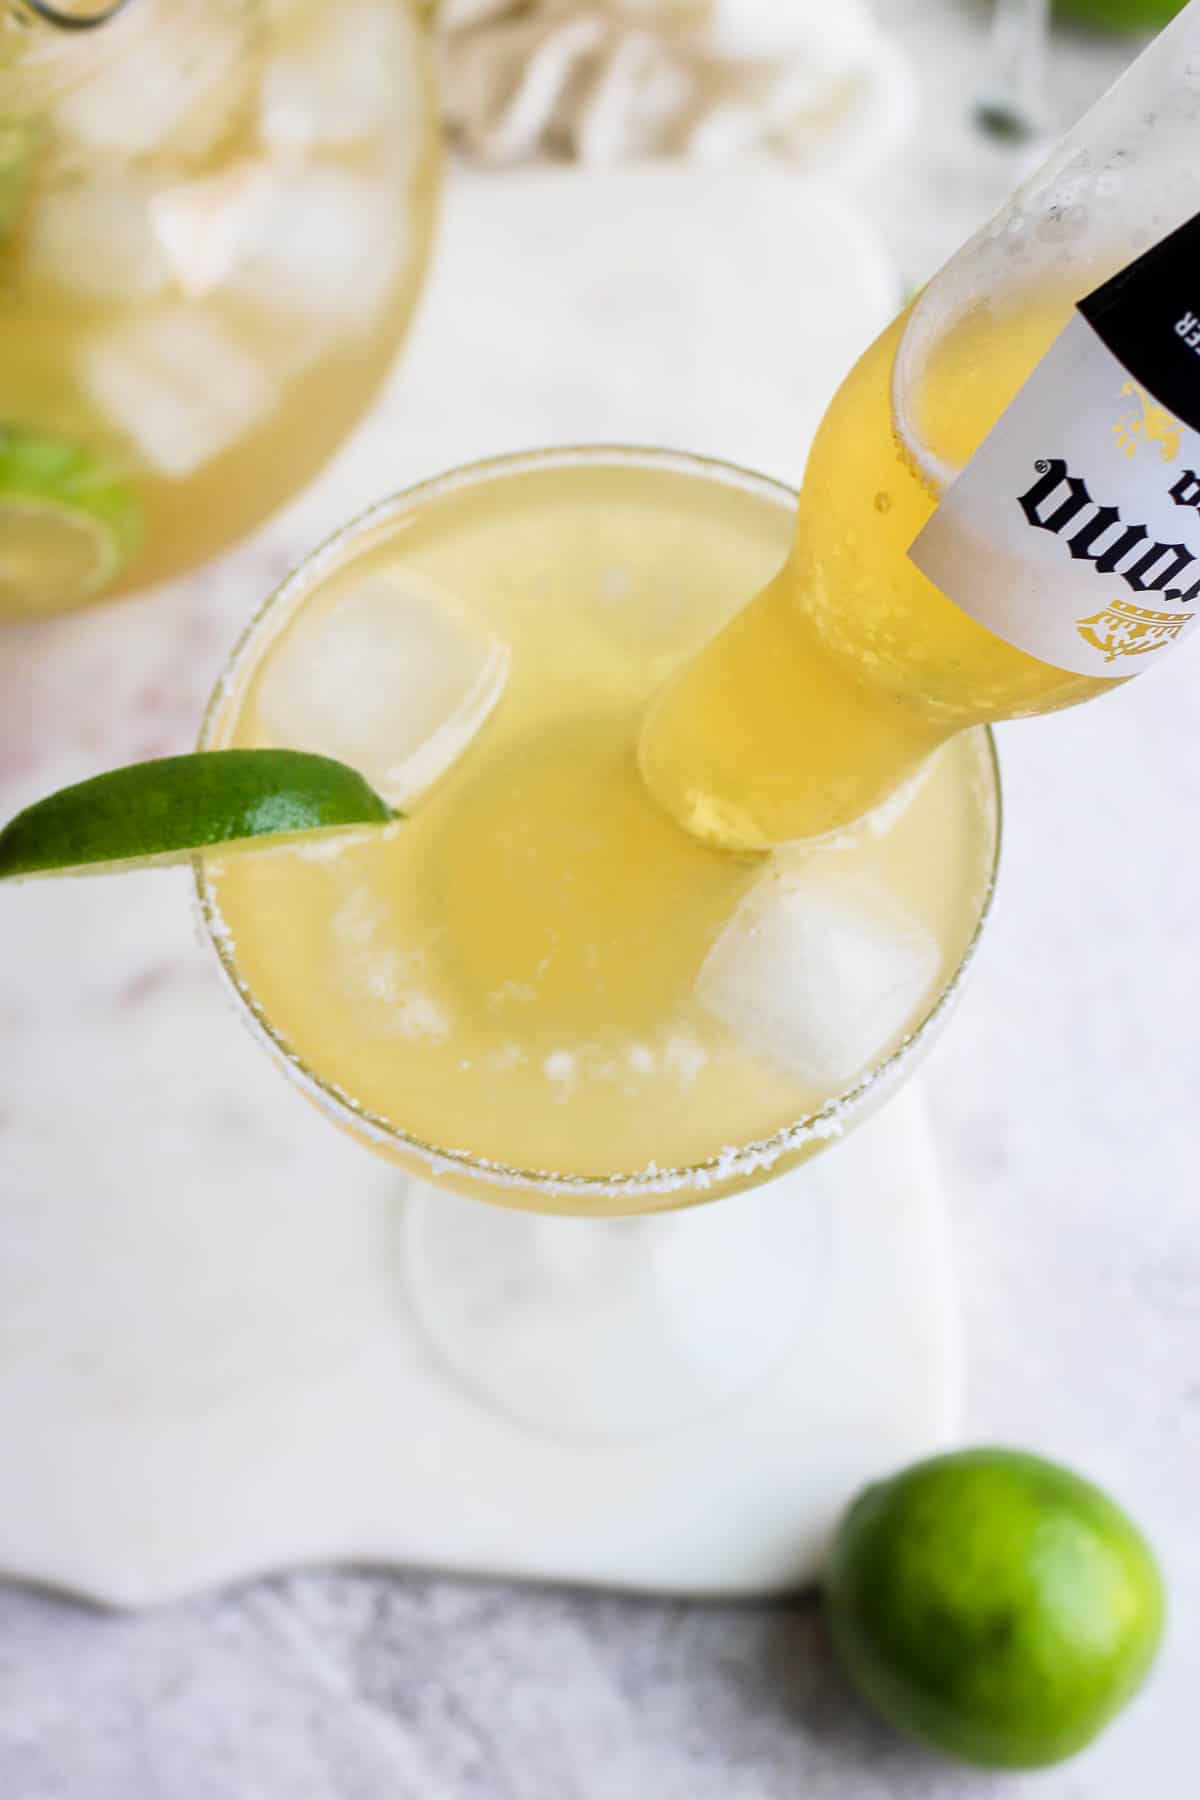 A corona sticking out of a beer margarita.